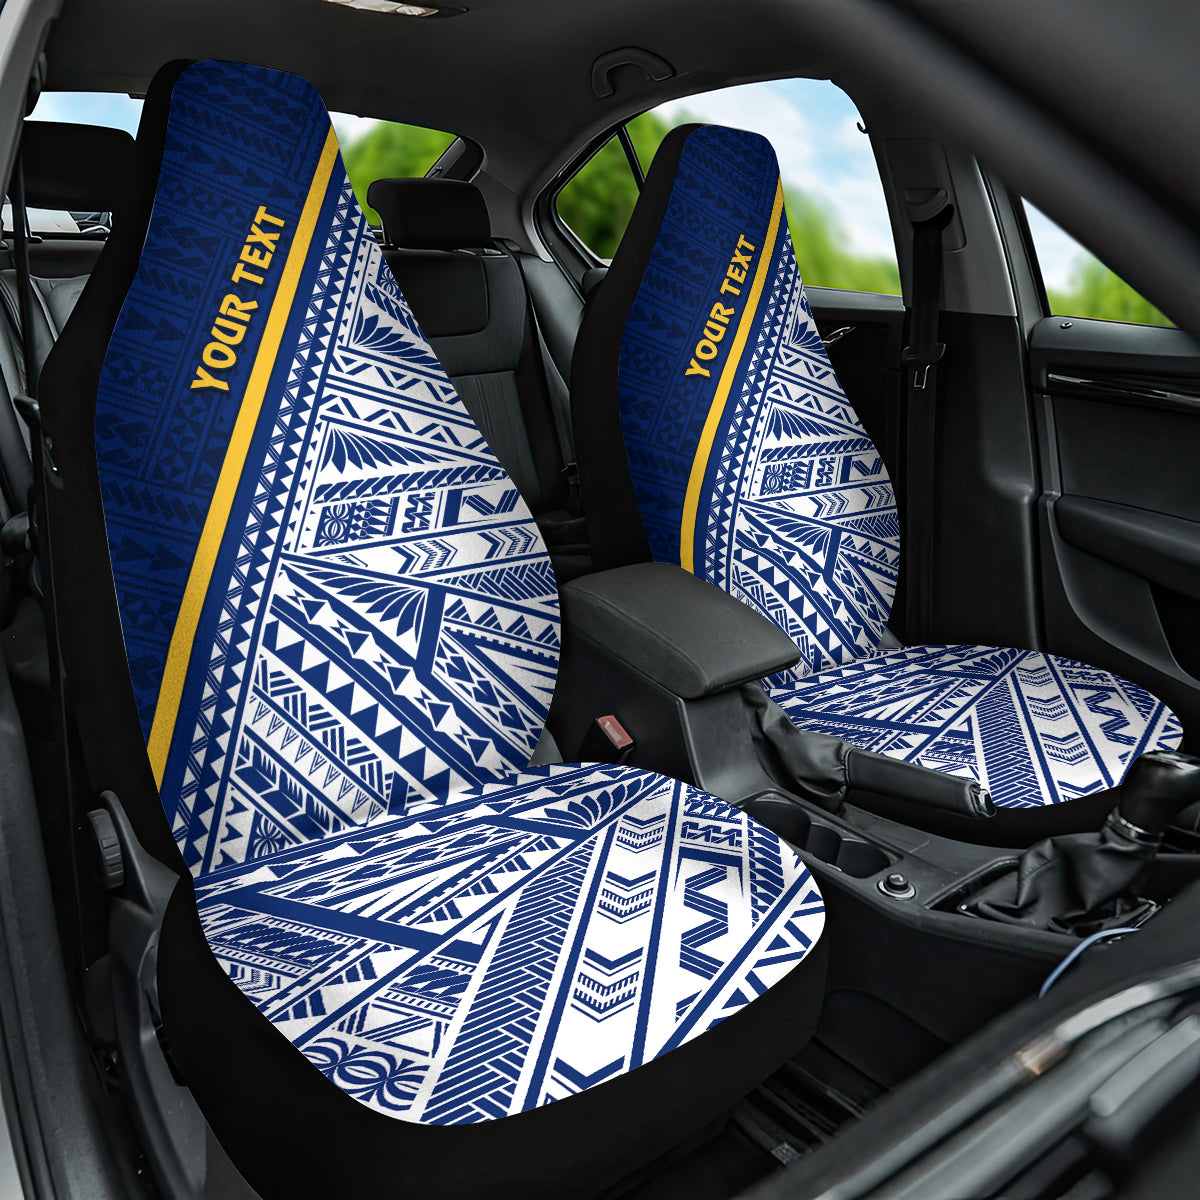 Nauru Independence Day Car Seat Cover Repubrikin Naoero Gods Will First LT01 One Size Blue - Polynesian Pride